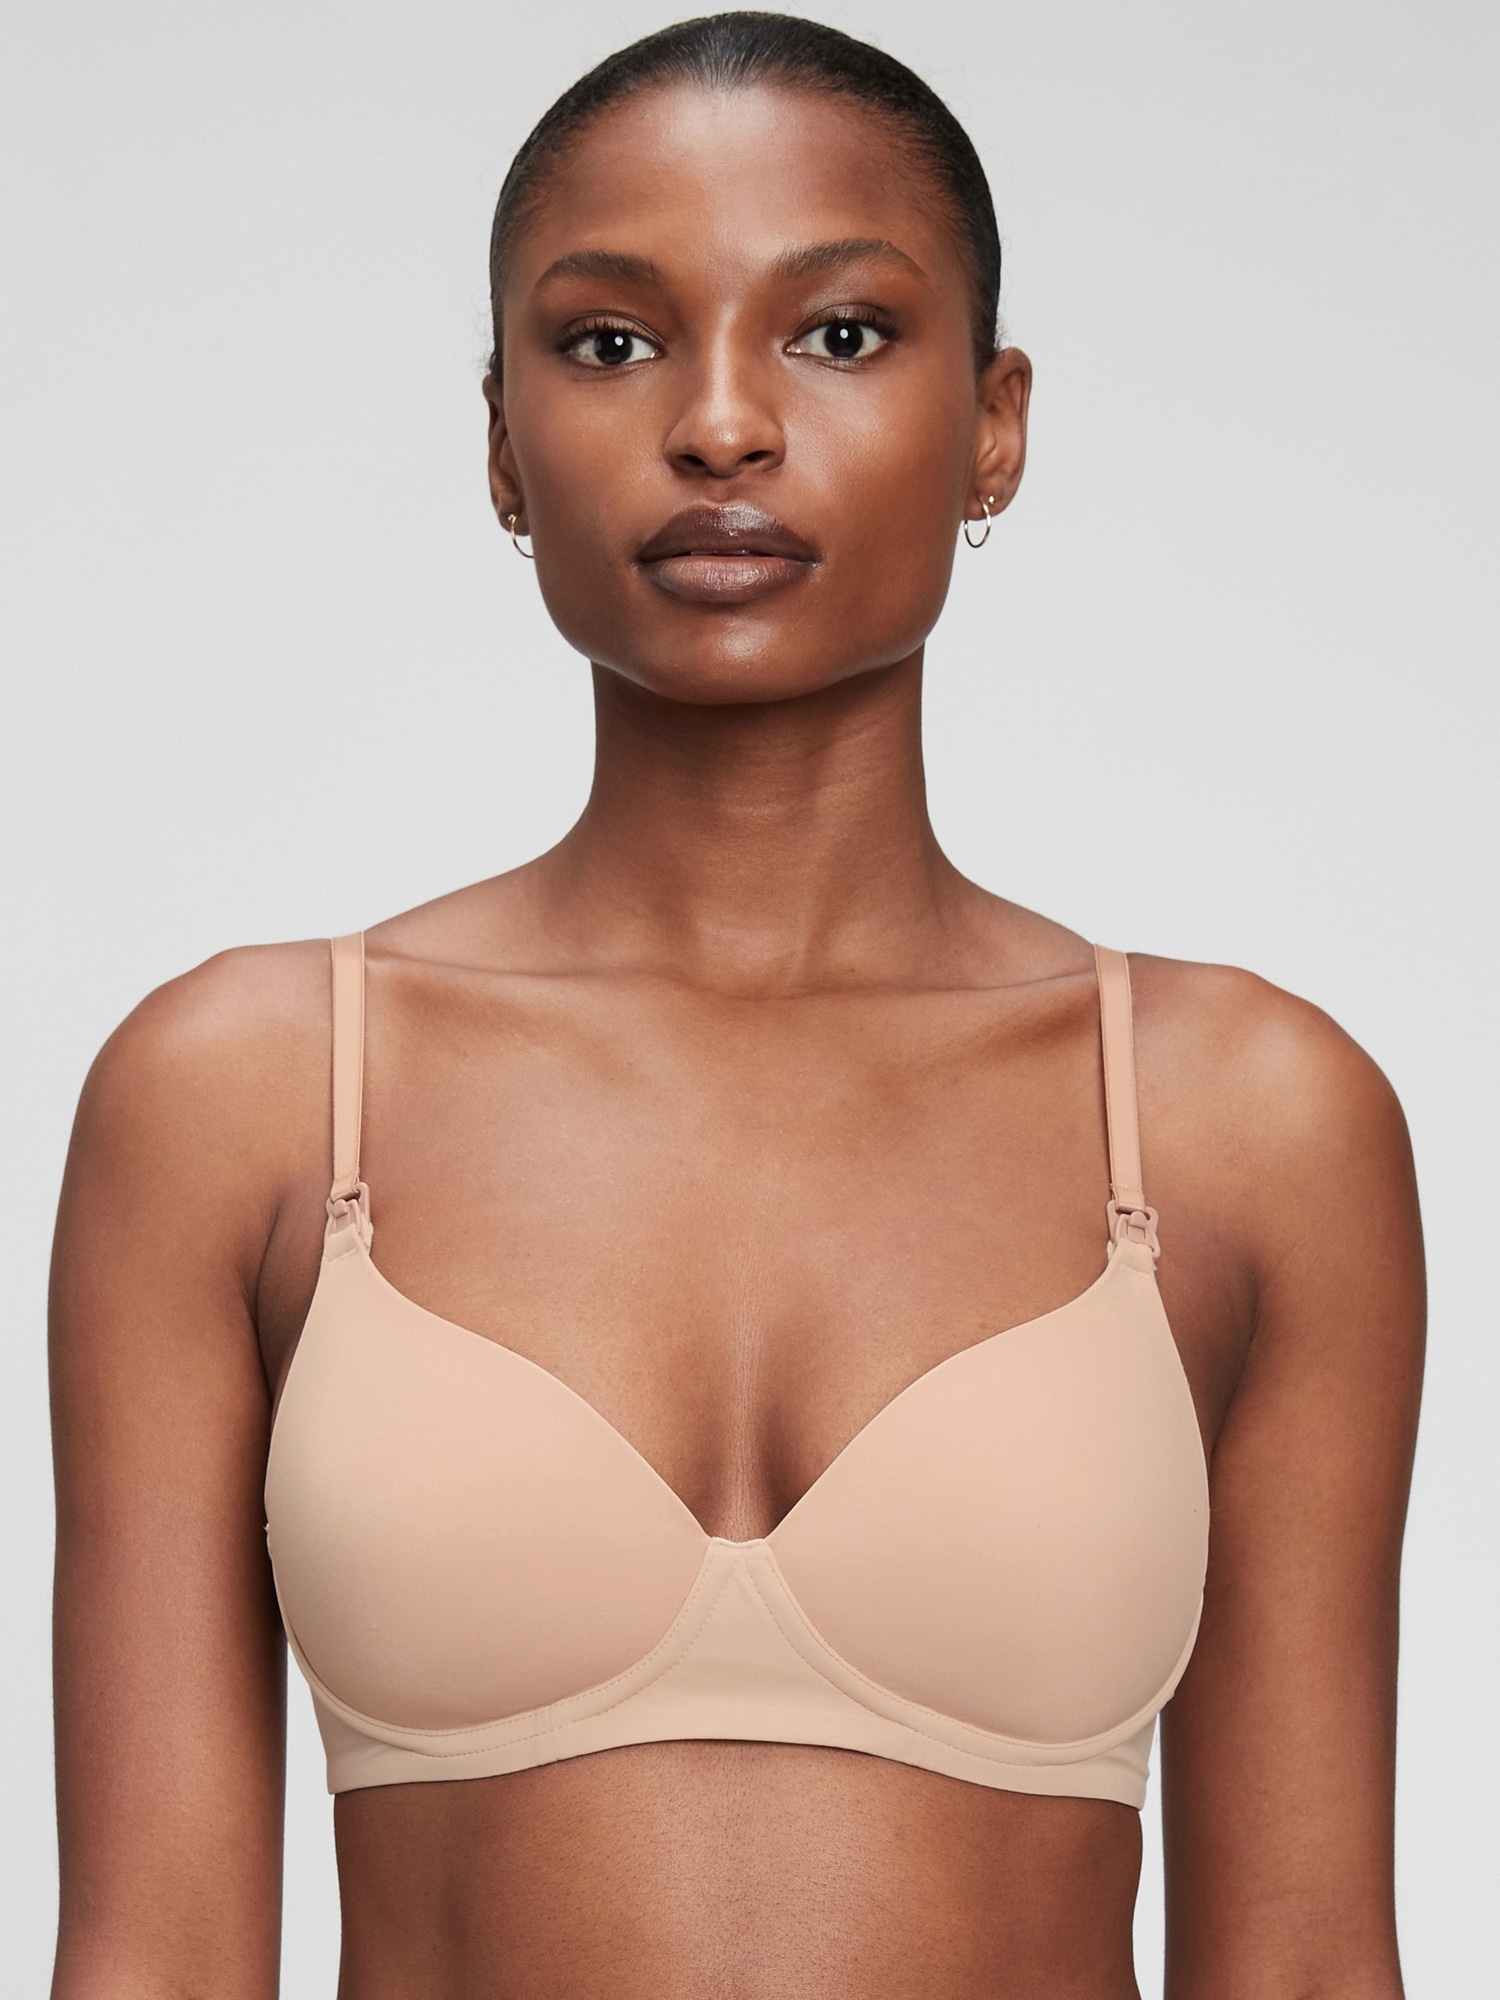 gap, underwire cuts, gore keeps riding up 30D - Passionata » Starlight